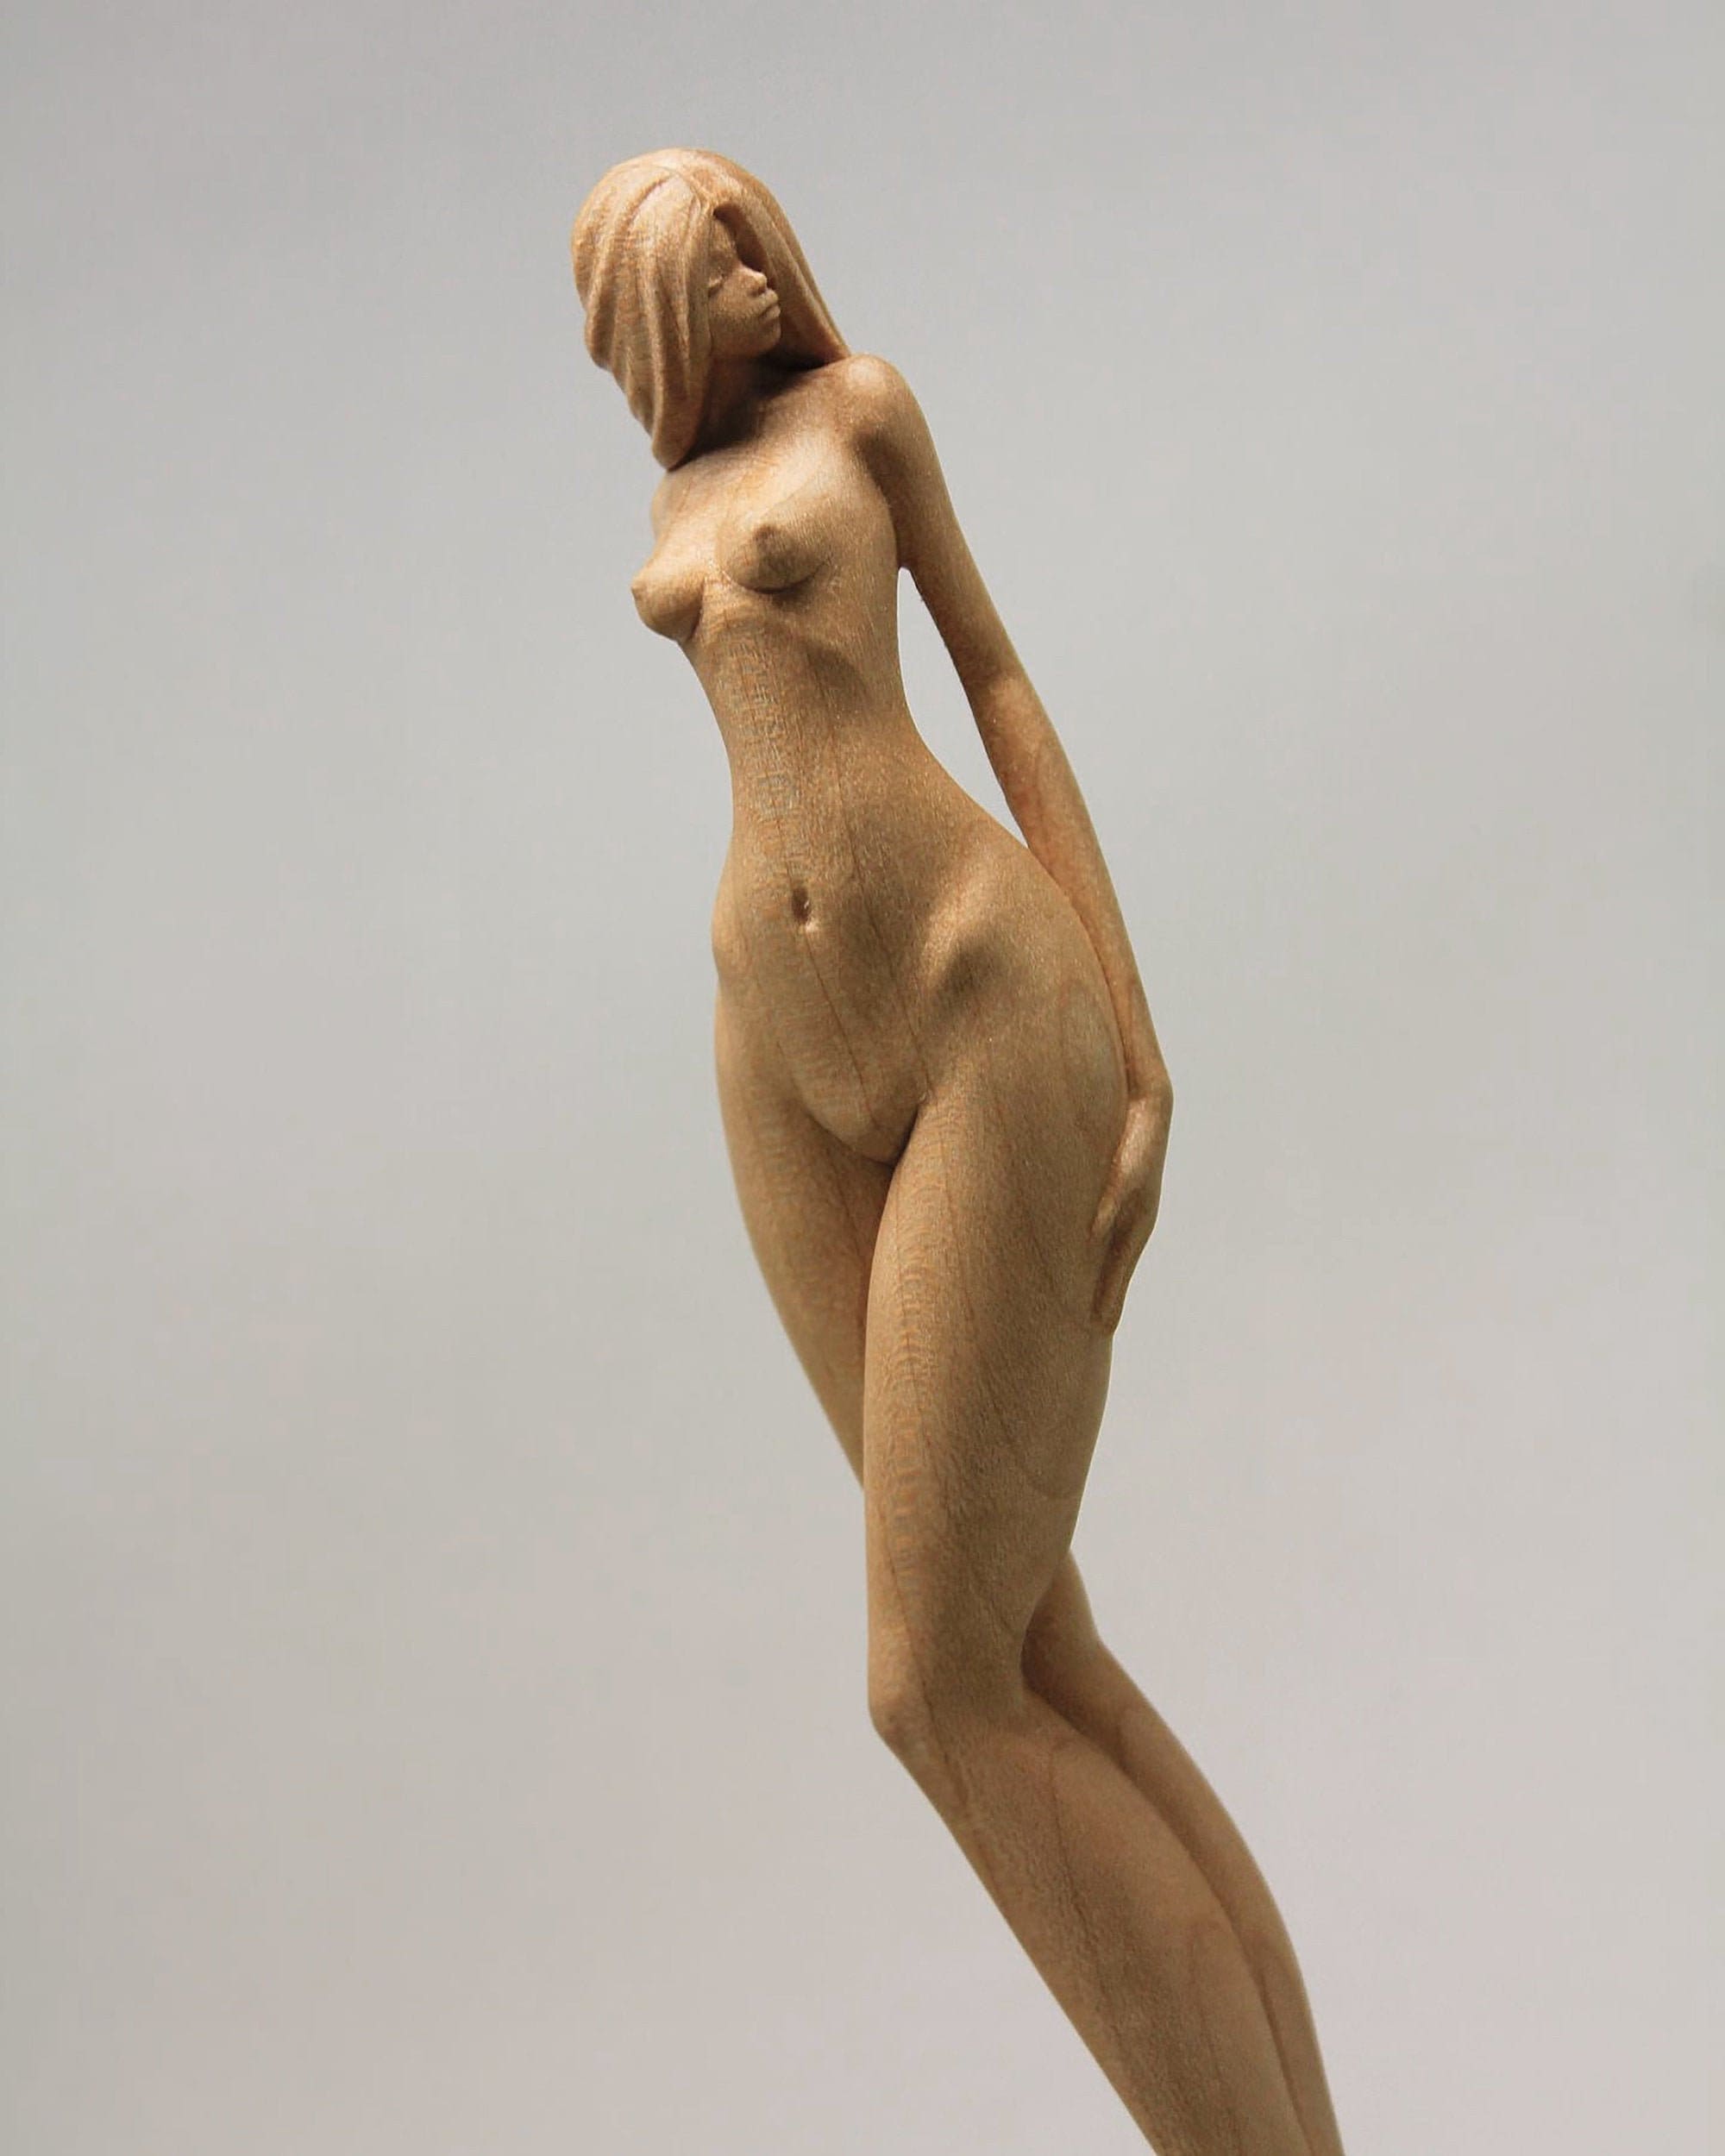 Naked Woman Wooden Sculpturefemale Body Figurine Decorerotic image picture